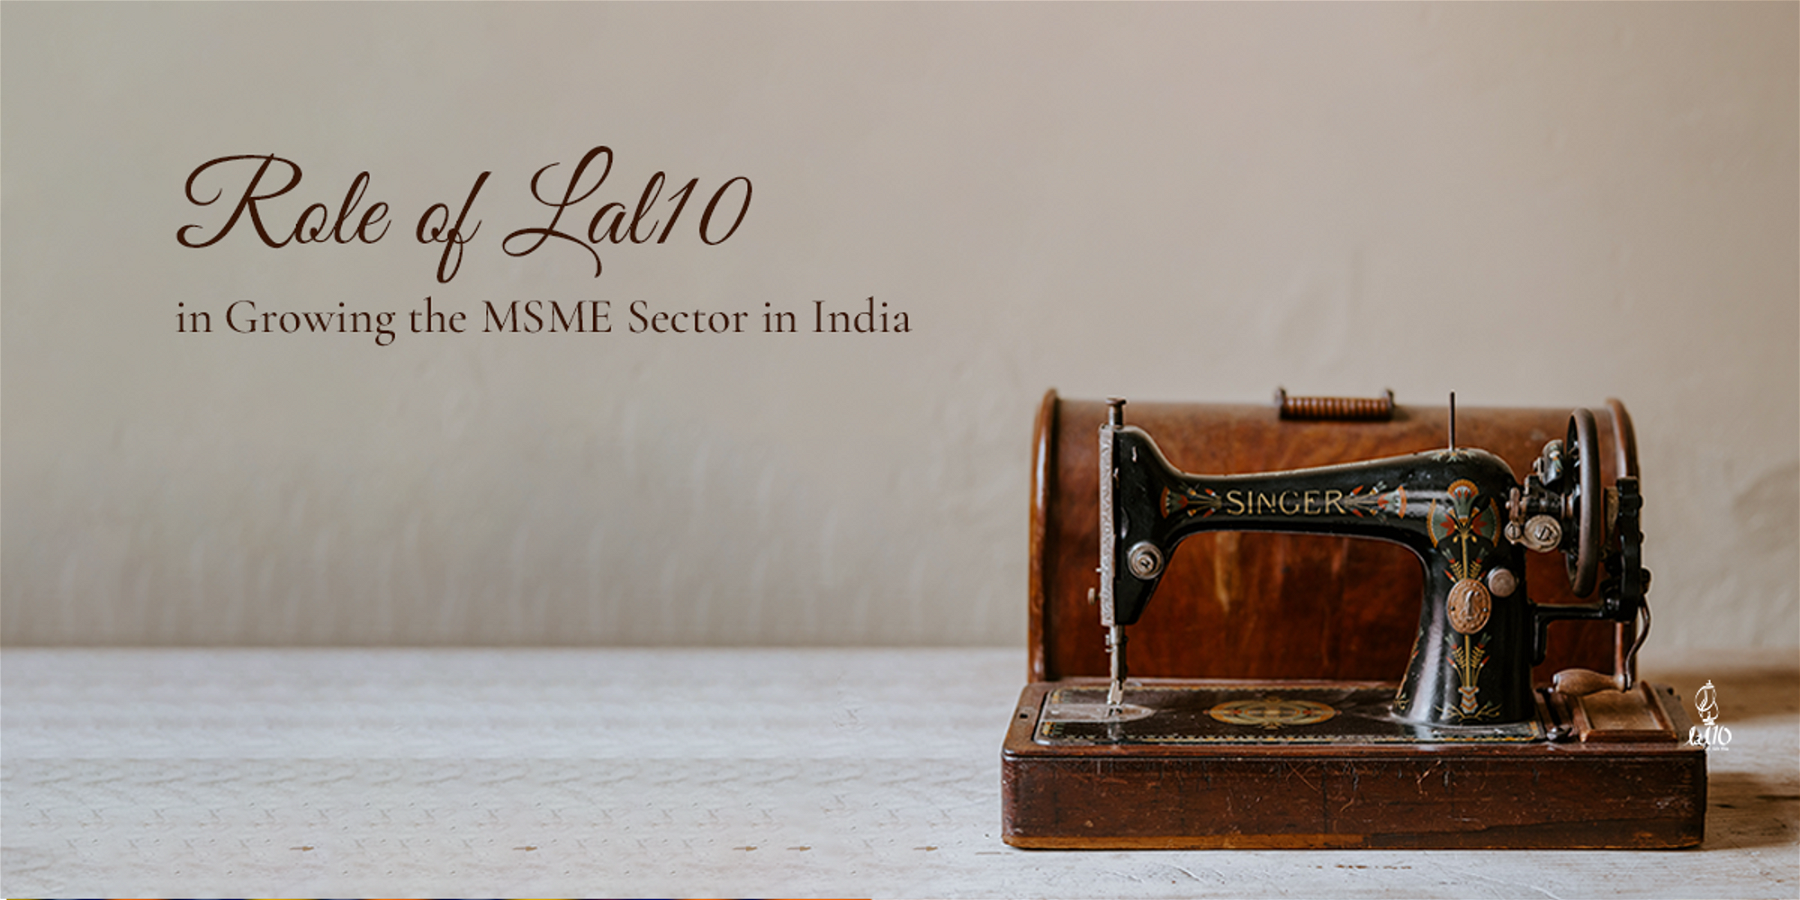 Role of LAL10 in Growing the MSME Sector in India